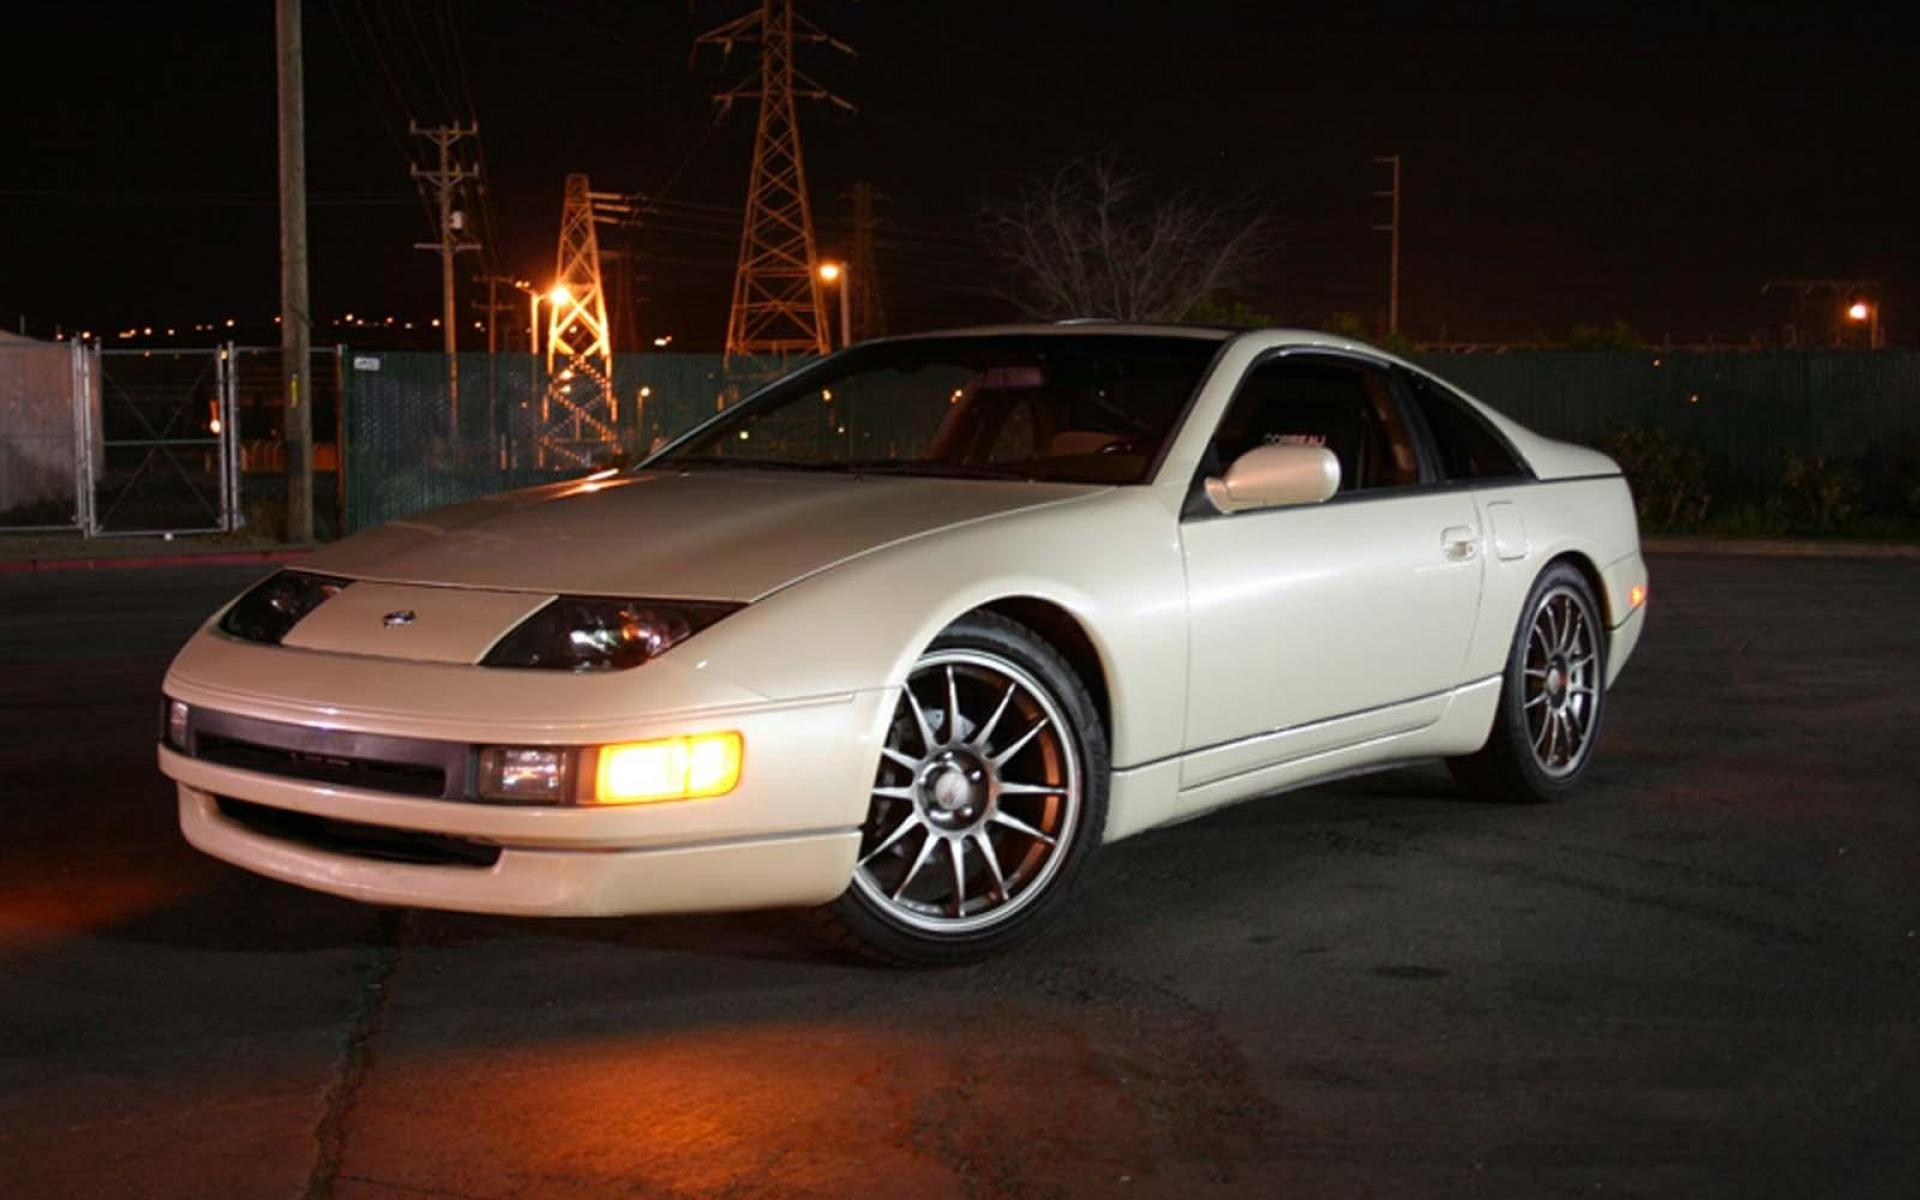 1920x1200 Free download NISSAN 300ZX NIGHT HD WALLPAPER 25274 HD Wallpapers [] for your Desktop, Mobile \u0026 Tablet | Explore 39+ Nissan 300zx Wallpaper | Nissan Wallpapers